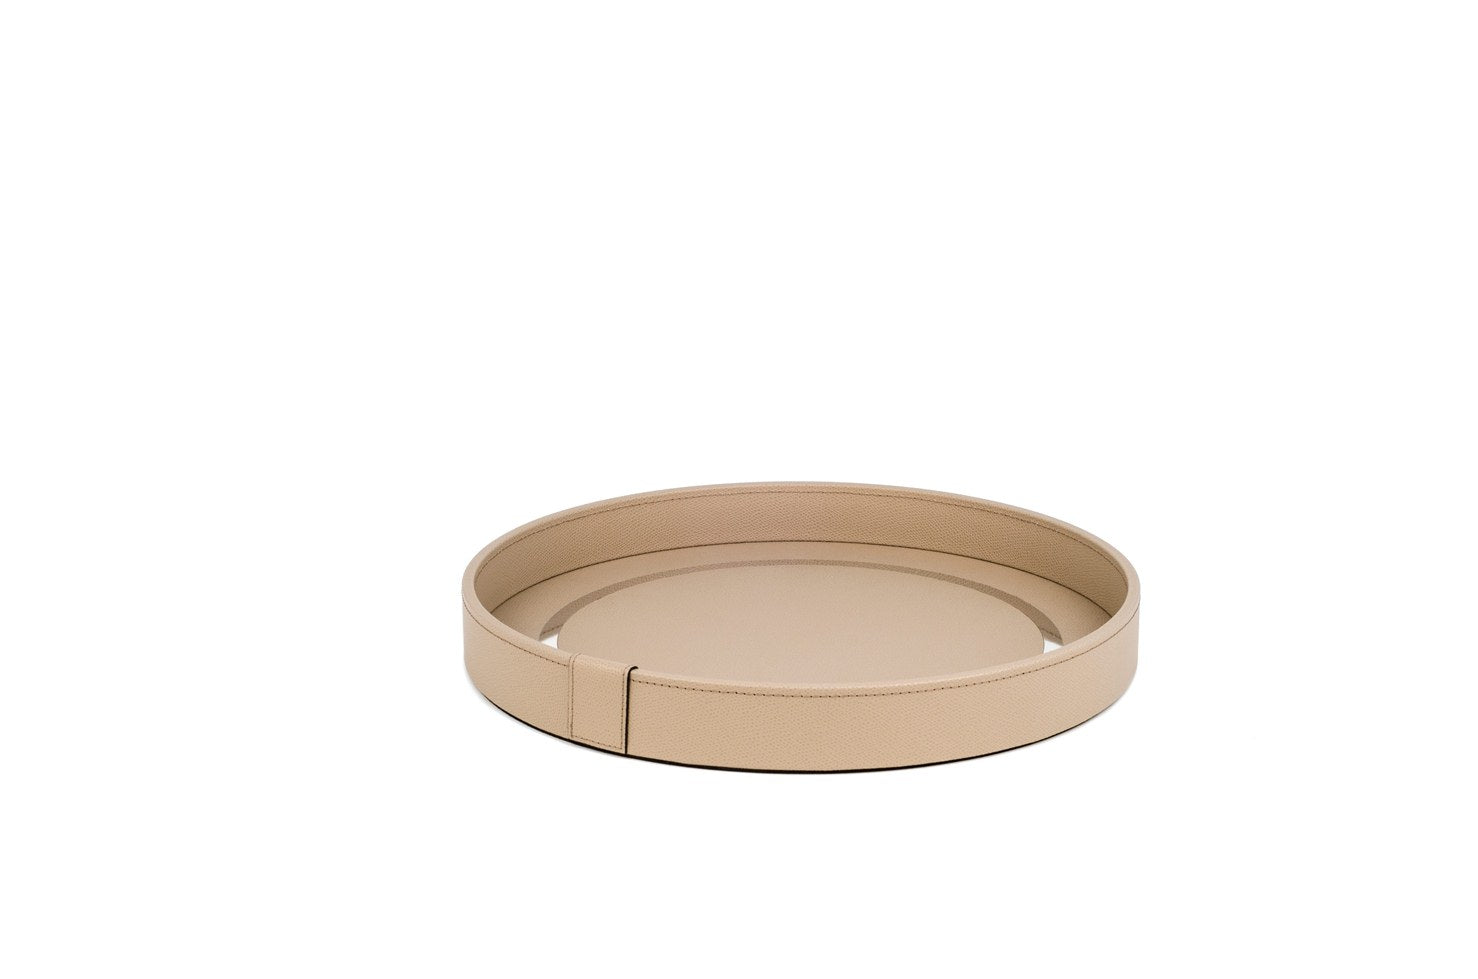 Pinetti Venere Round Leather-Covered Wood Tray With Inner Chromed Frame | Tray with wood base covered in leather | Features a non-slip base and inner chromed frame | Explore Luxury Lifestyle Accessories at 2Jour Concierge, #1 luxury high-end gift & lifestyle shop